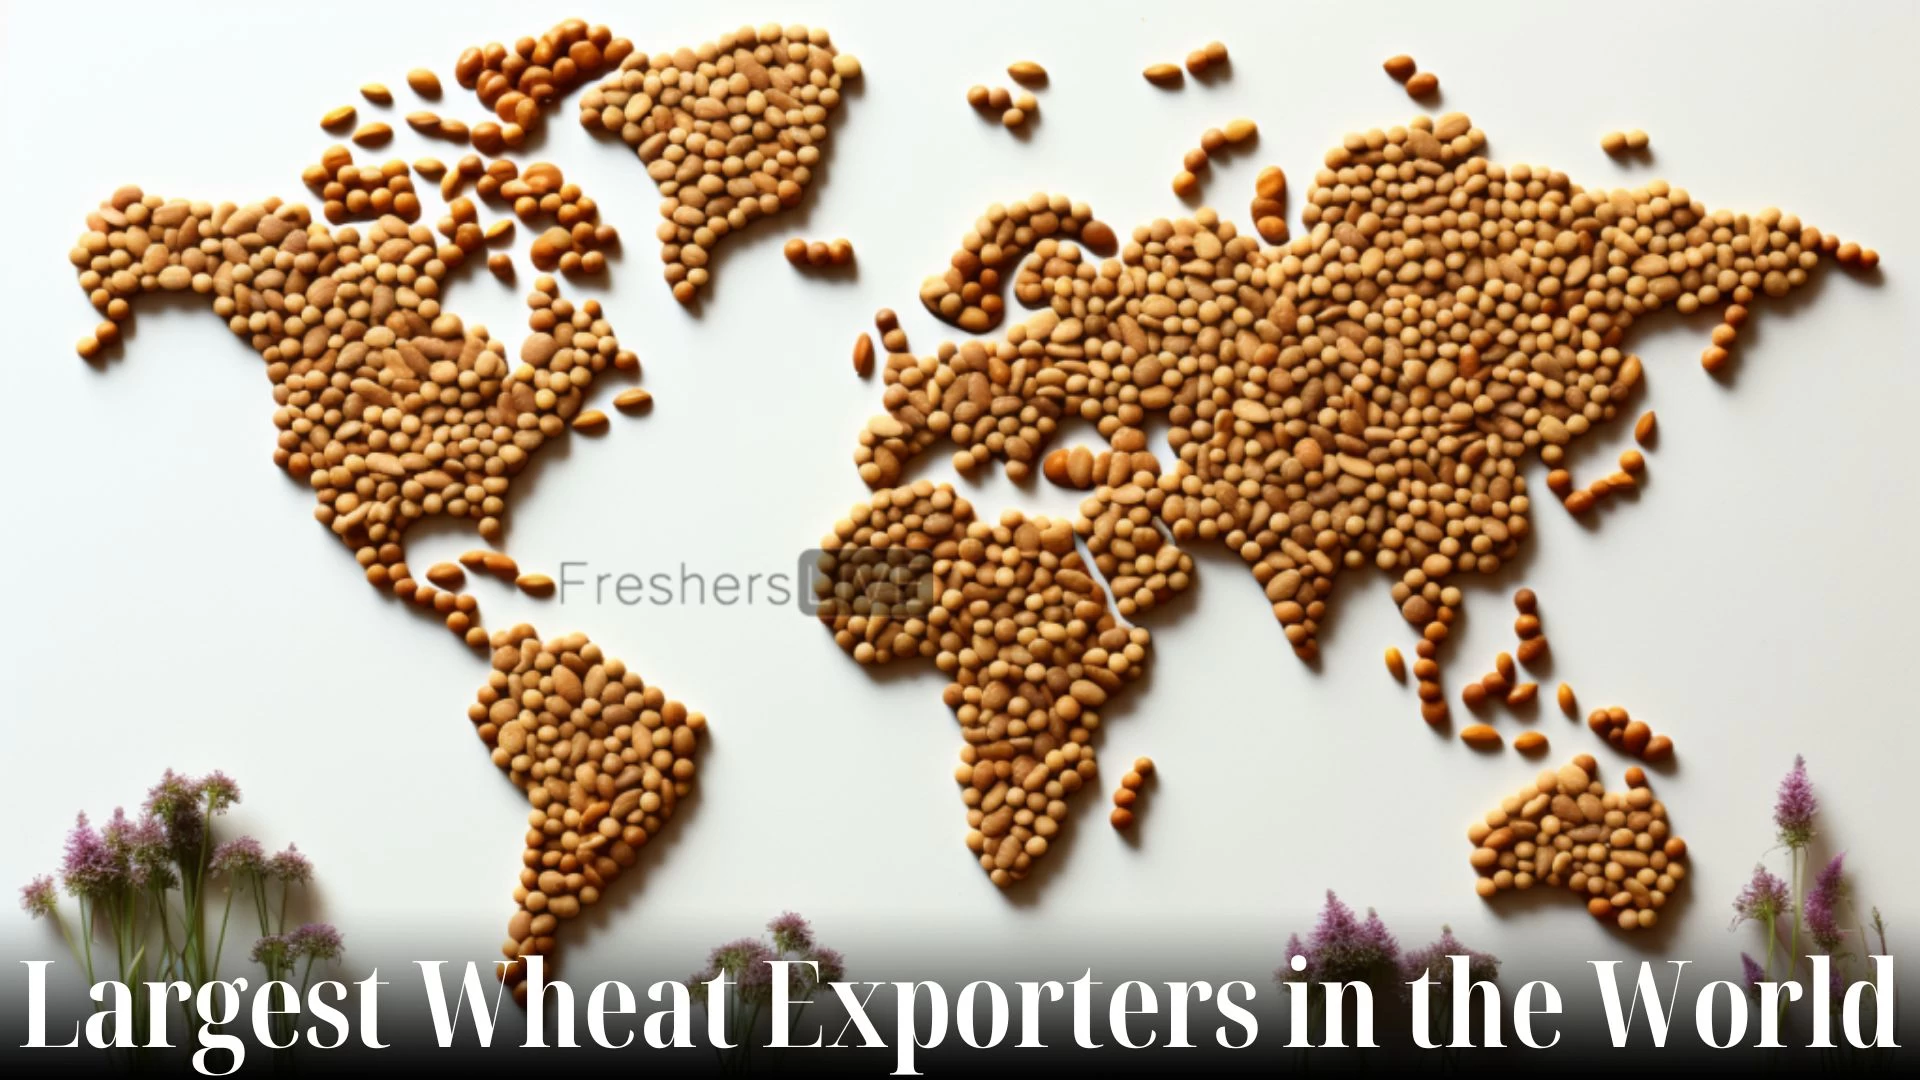 Largest Wheat Exporters in the World - Top 10 Grain Powerhouses